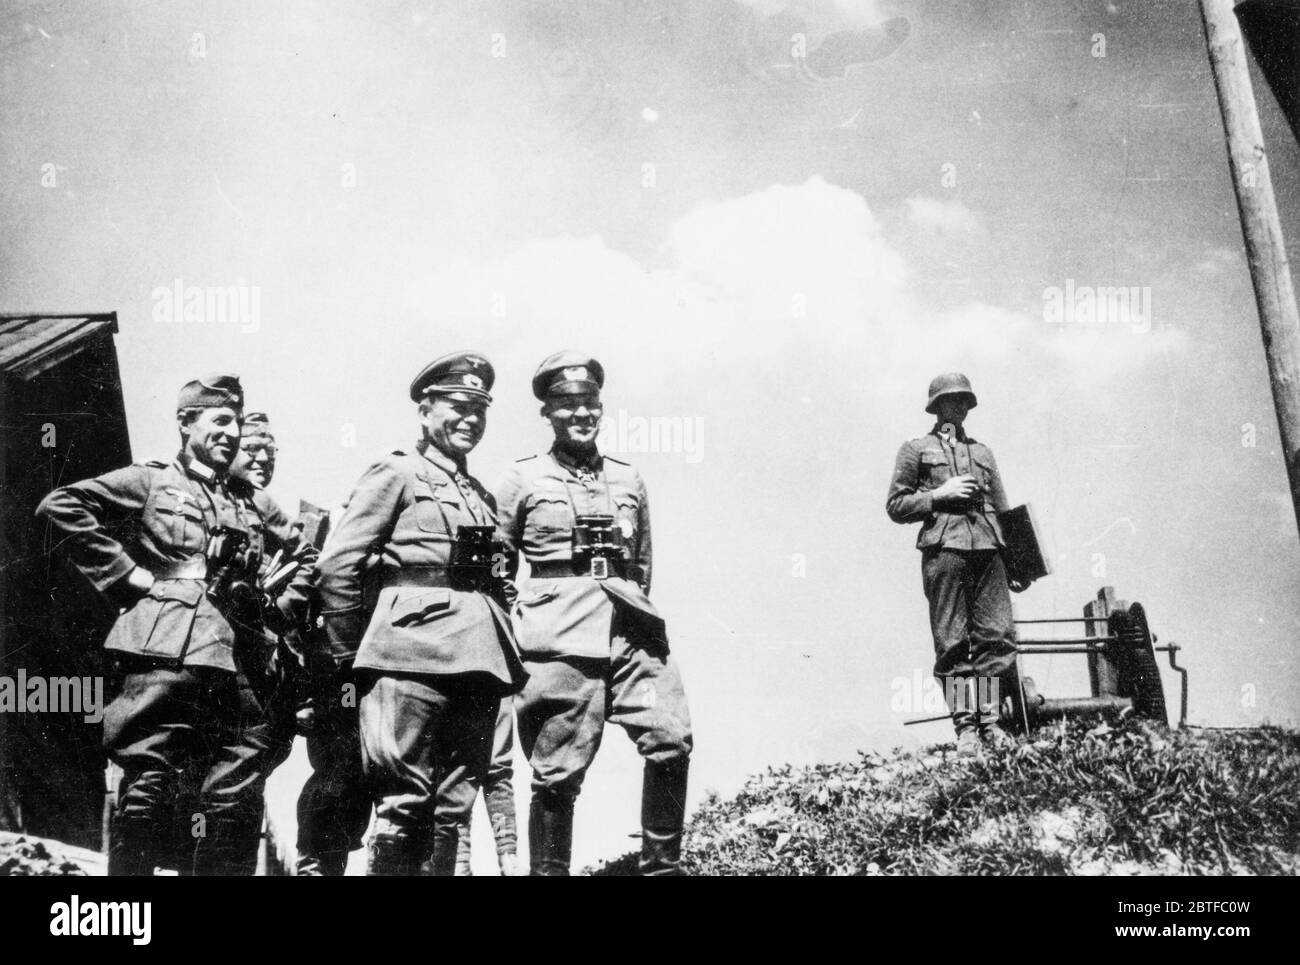 Heinz Guderian  Operation Barbarossa - German Invasion of Russia, 1941 - 15th Infantary Division of the Thuringia-Kurhessen Division Stock Photo